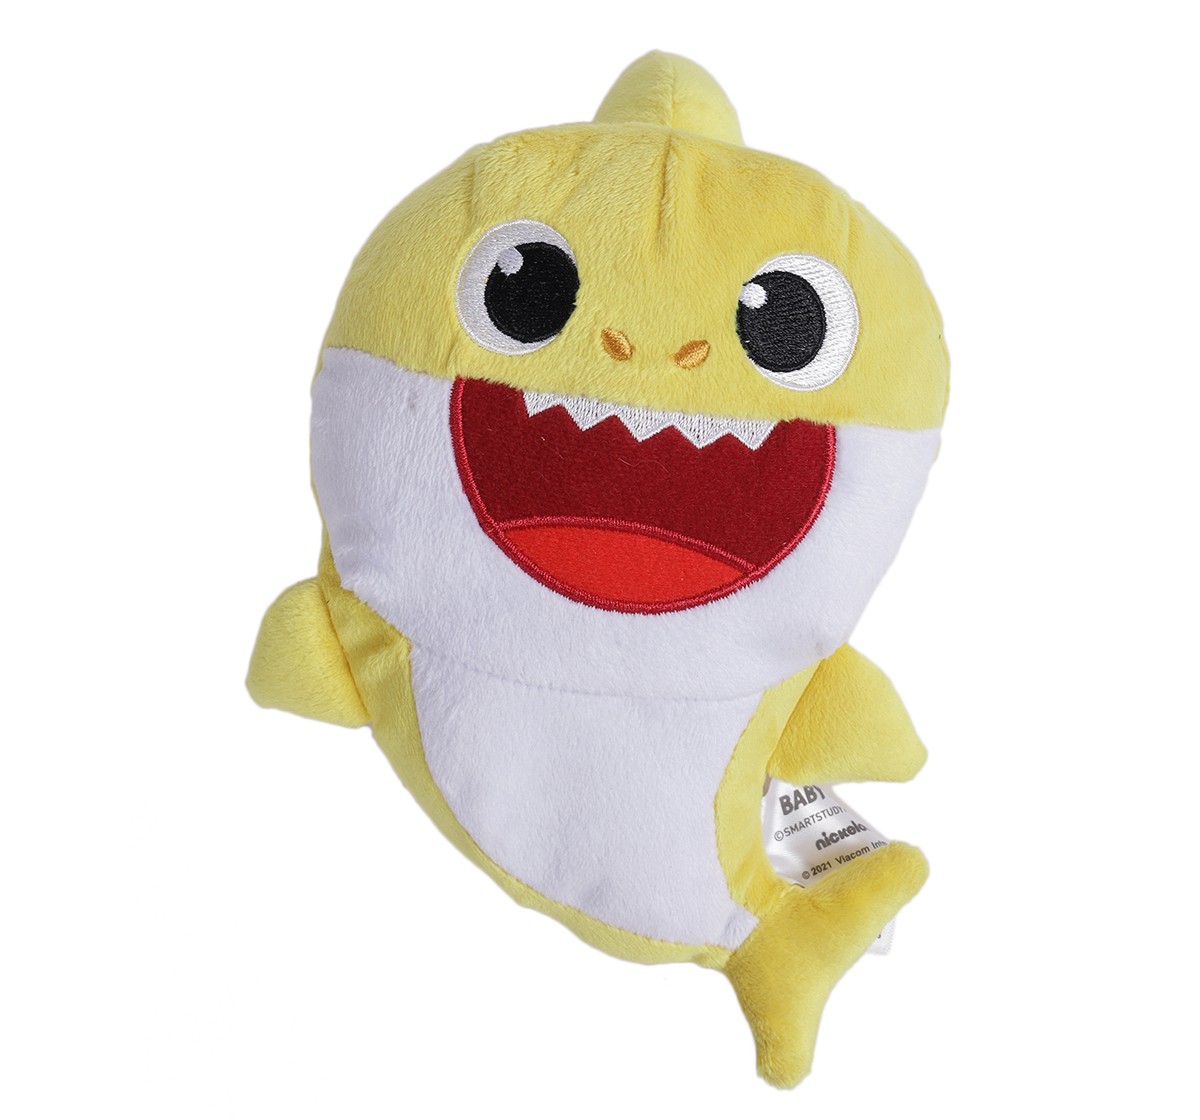 Baby Shark Plush Sing and Light up Plush Toy 12 Inch Baby Shark for 1 Year and Above